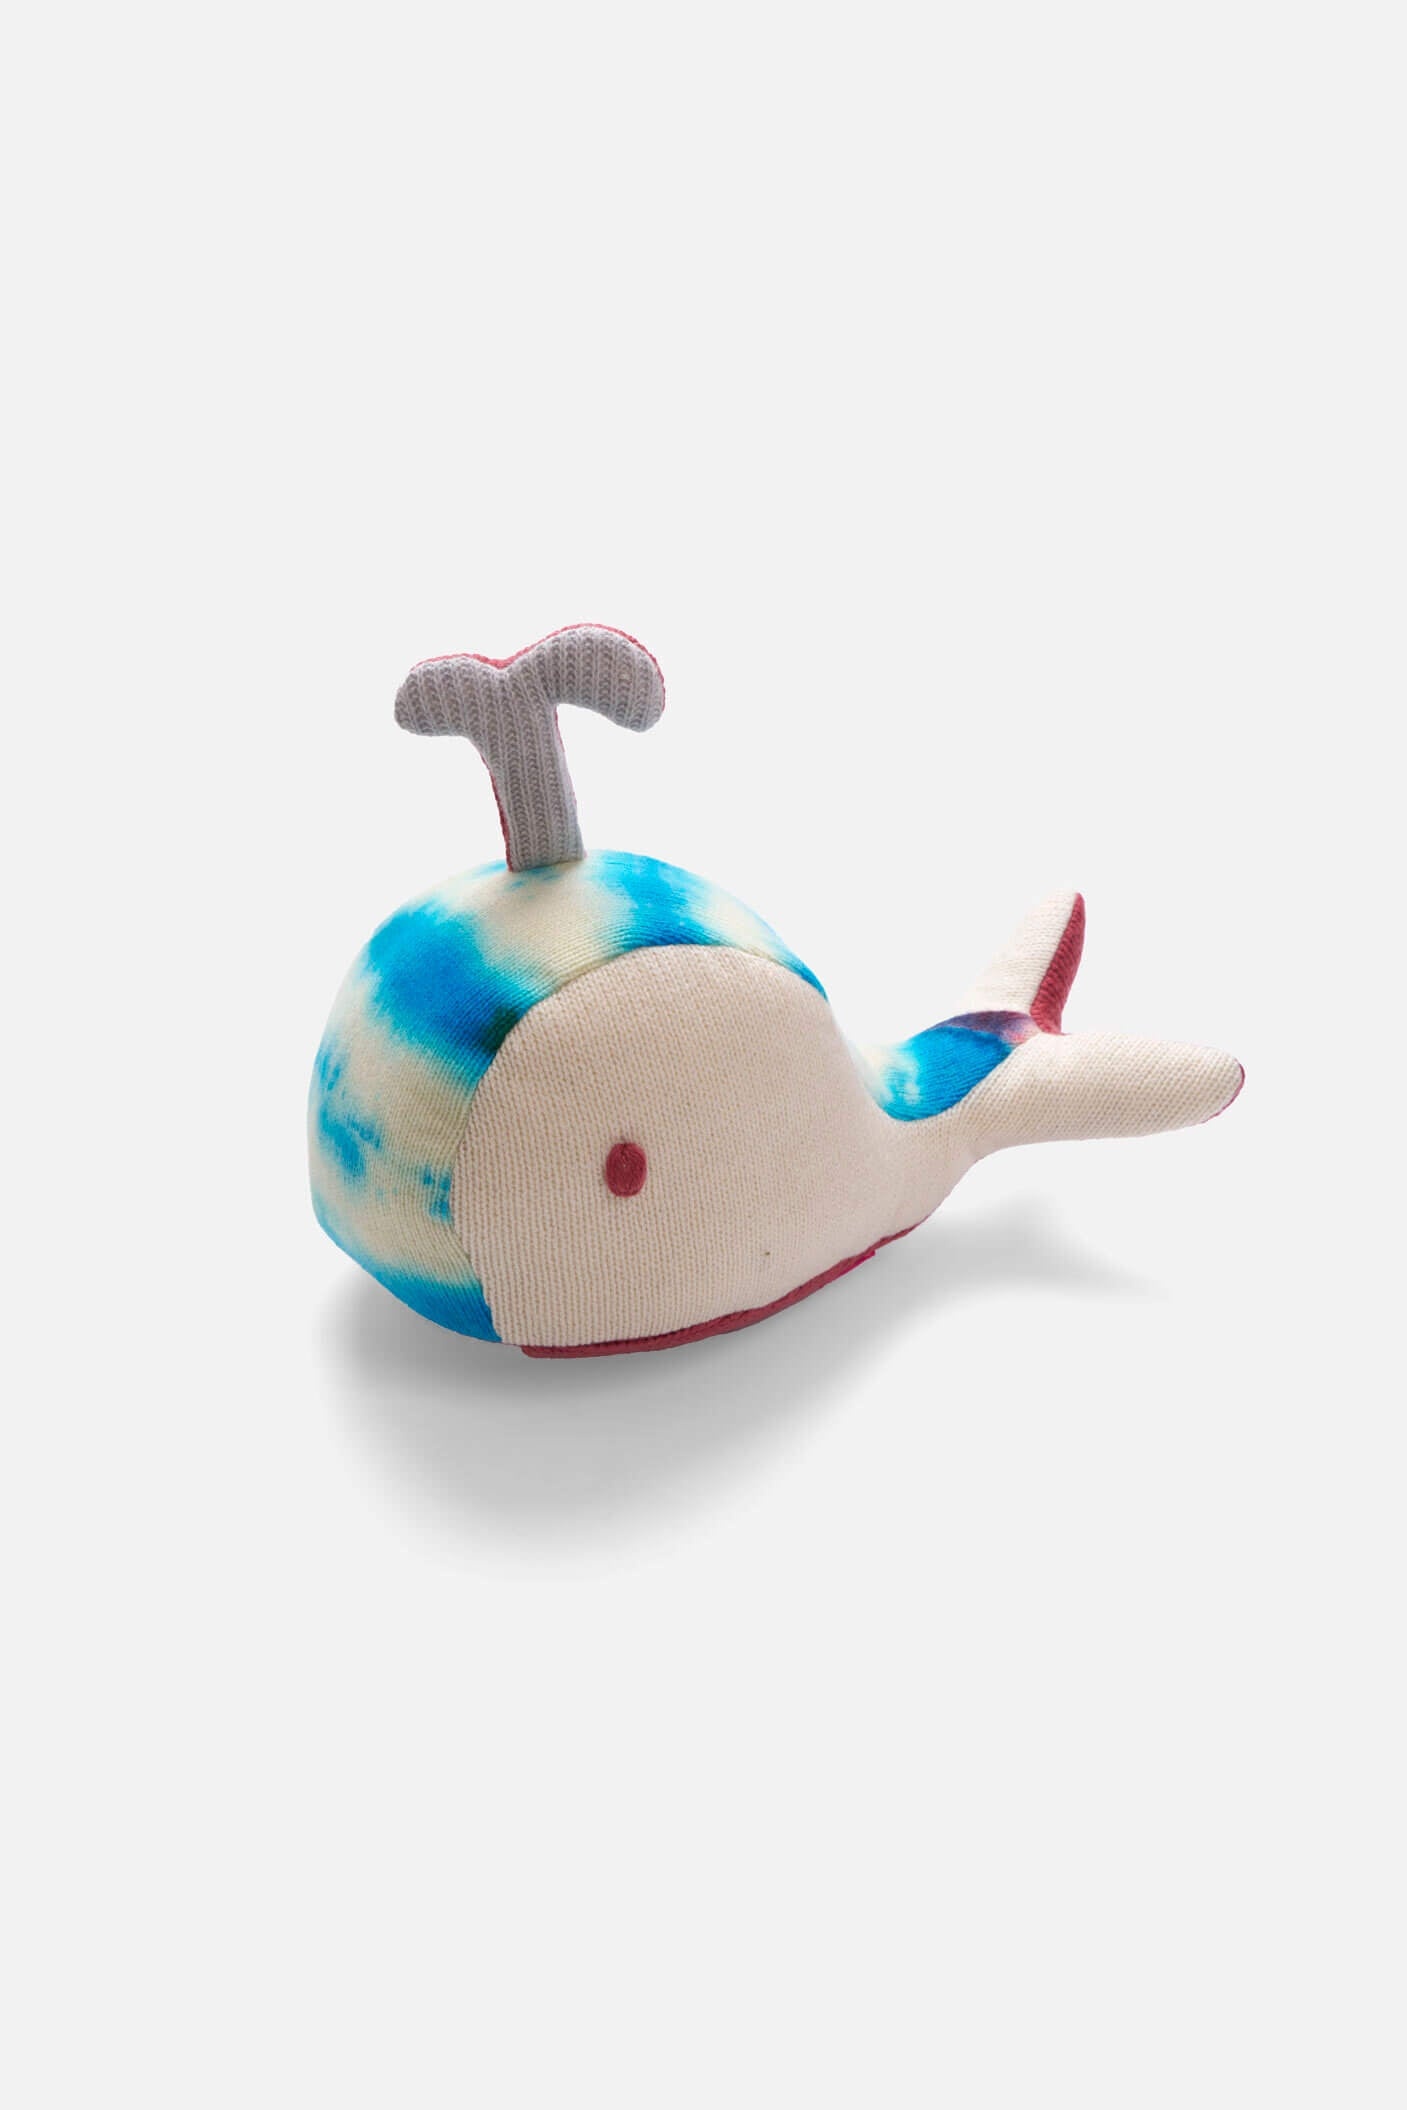 SMALL WHALE - 1